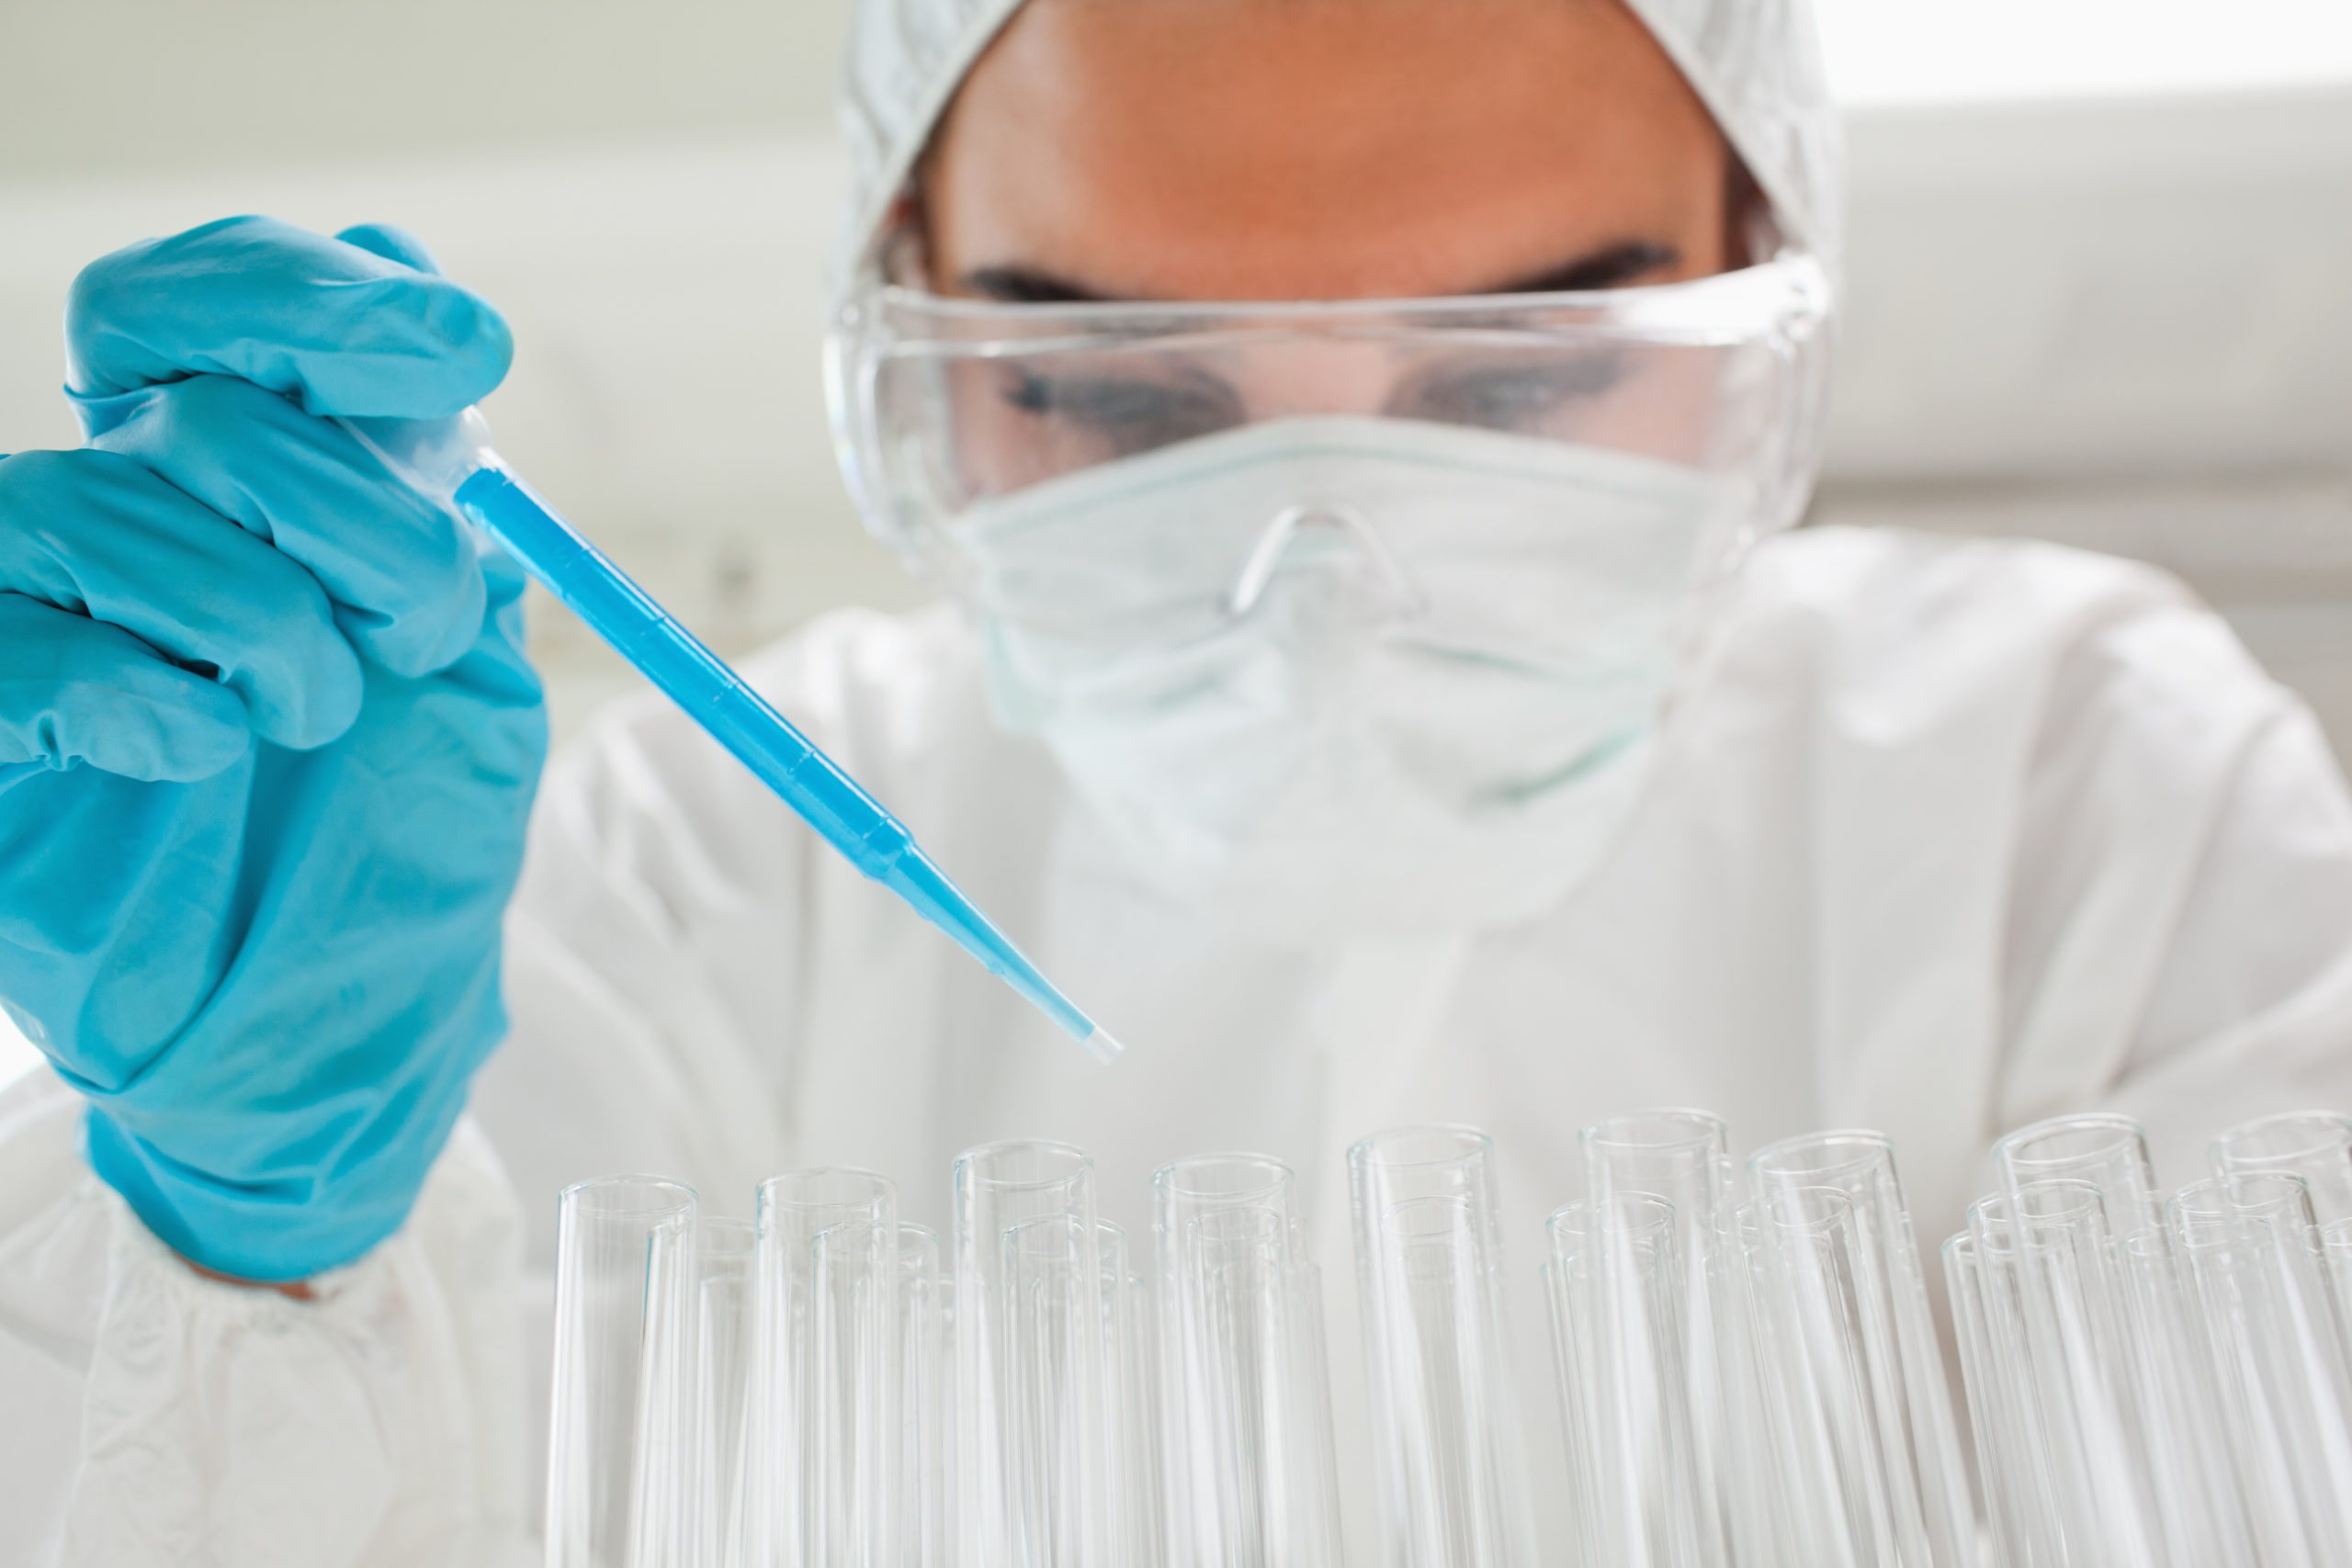 Laboratory Safety. How Well Are You Protected?